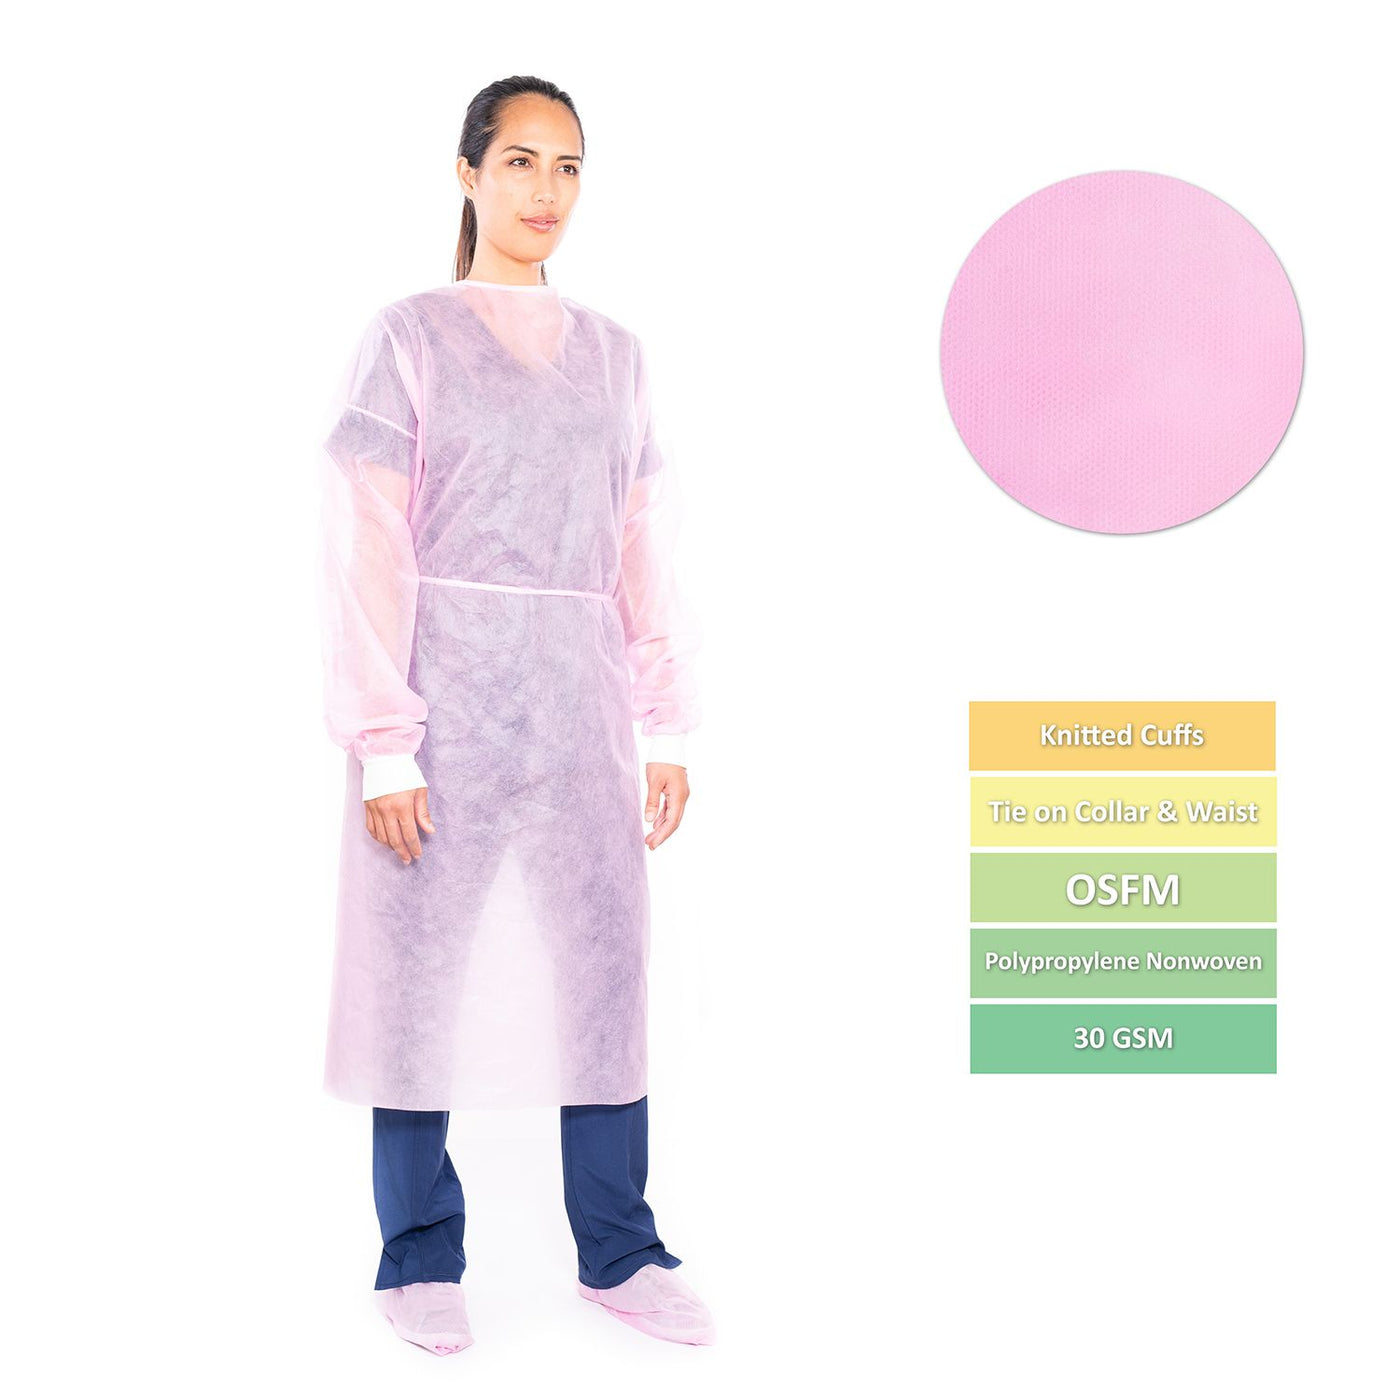 Pink Disposable Isolation Gowns - Medical & PPE Gowns (Case of 50)